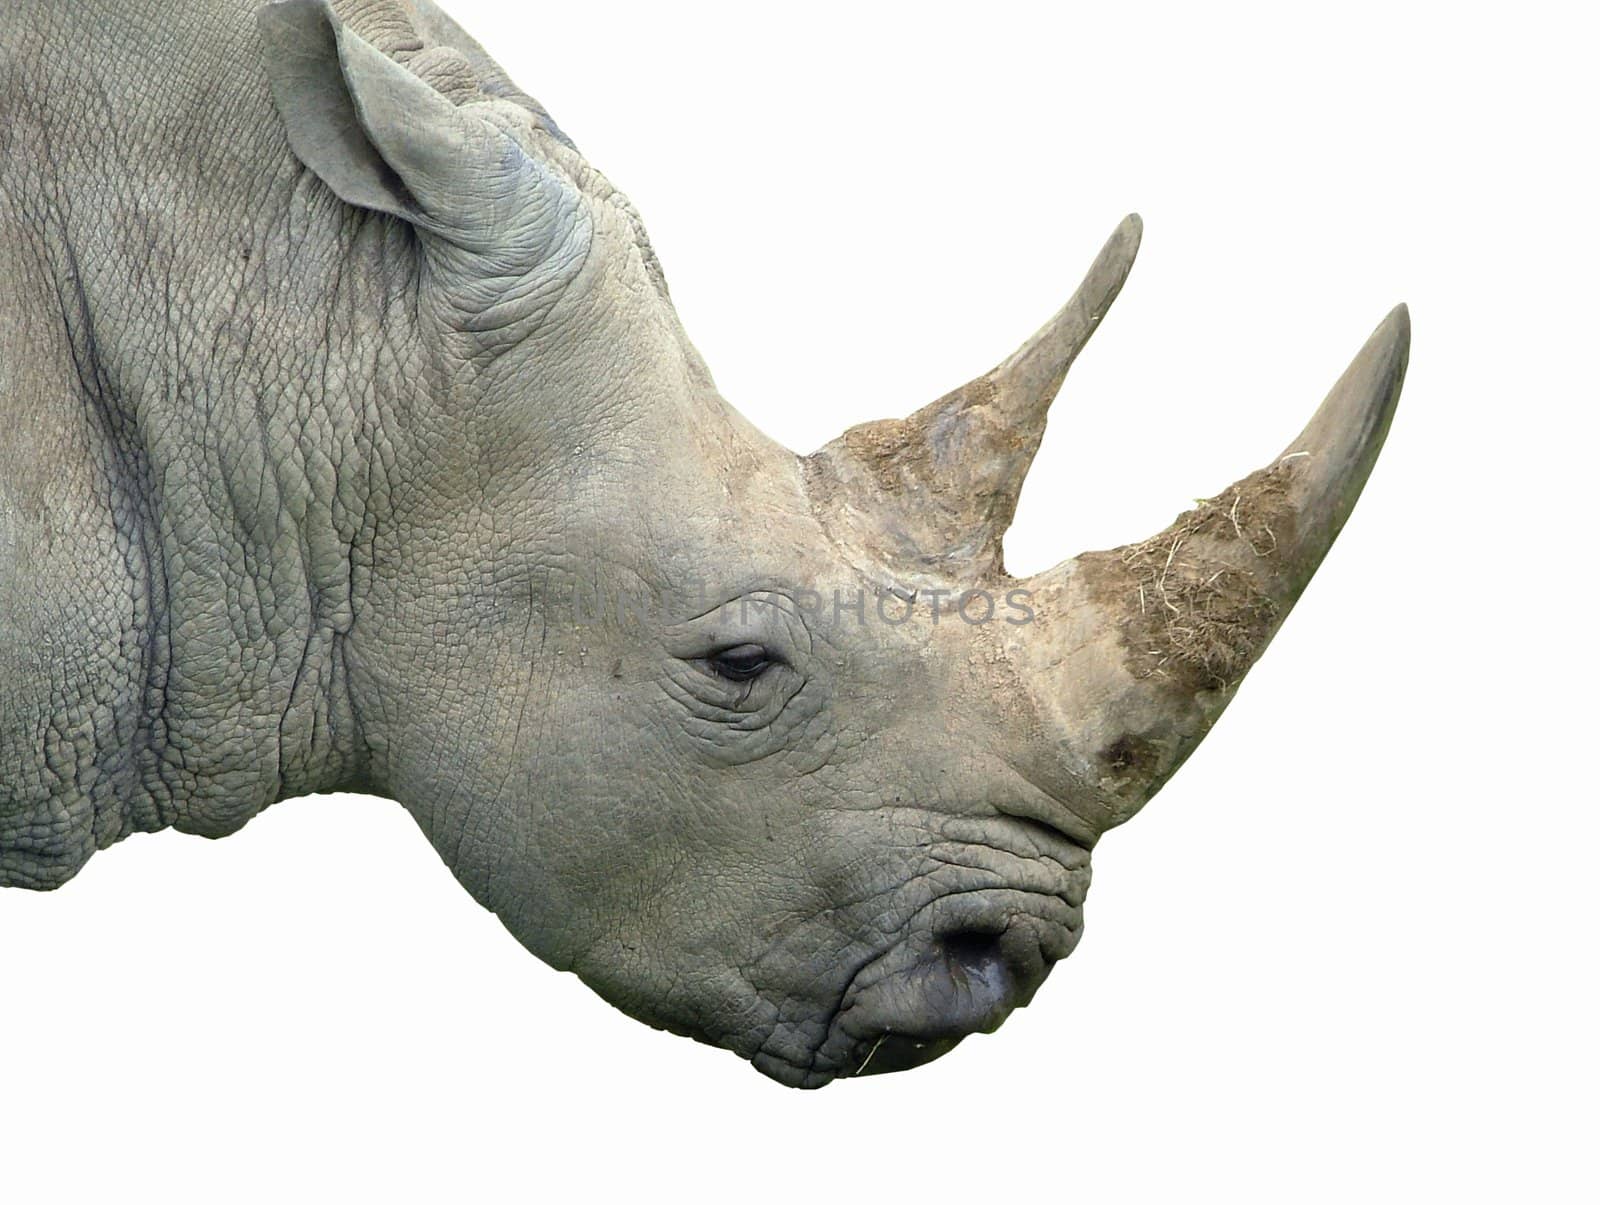 A rhinocerous isolated on white